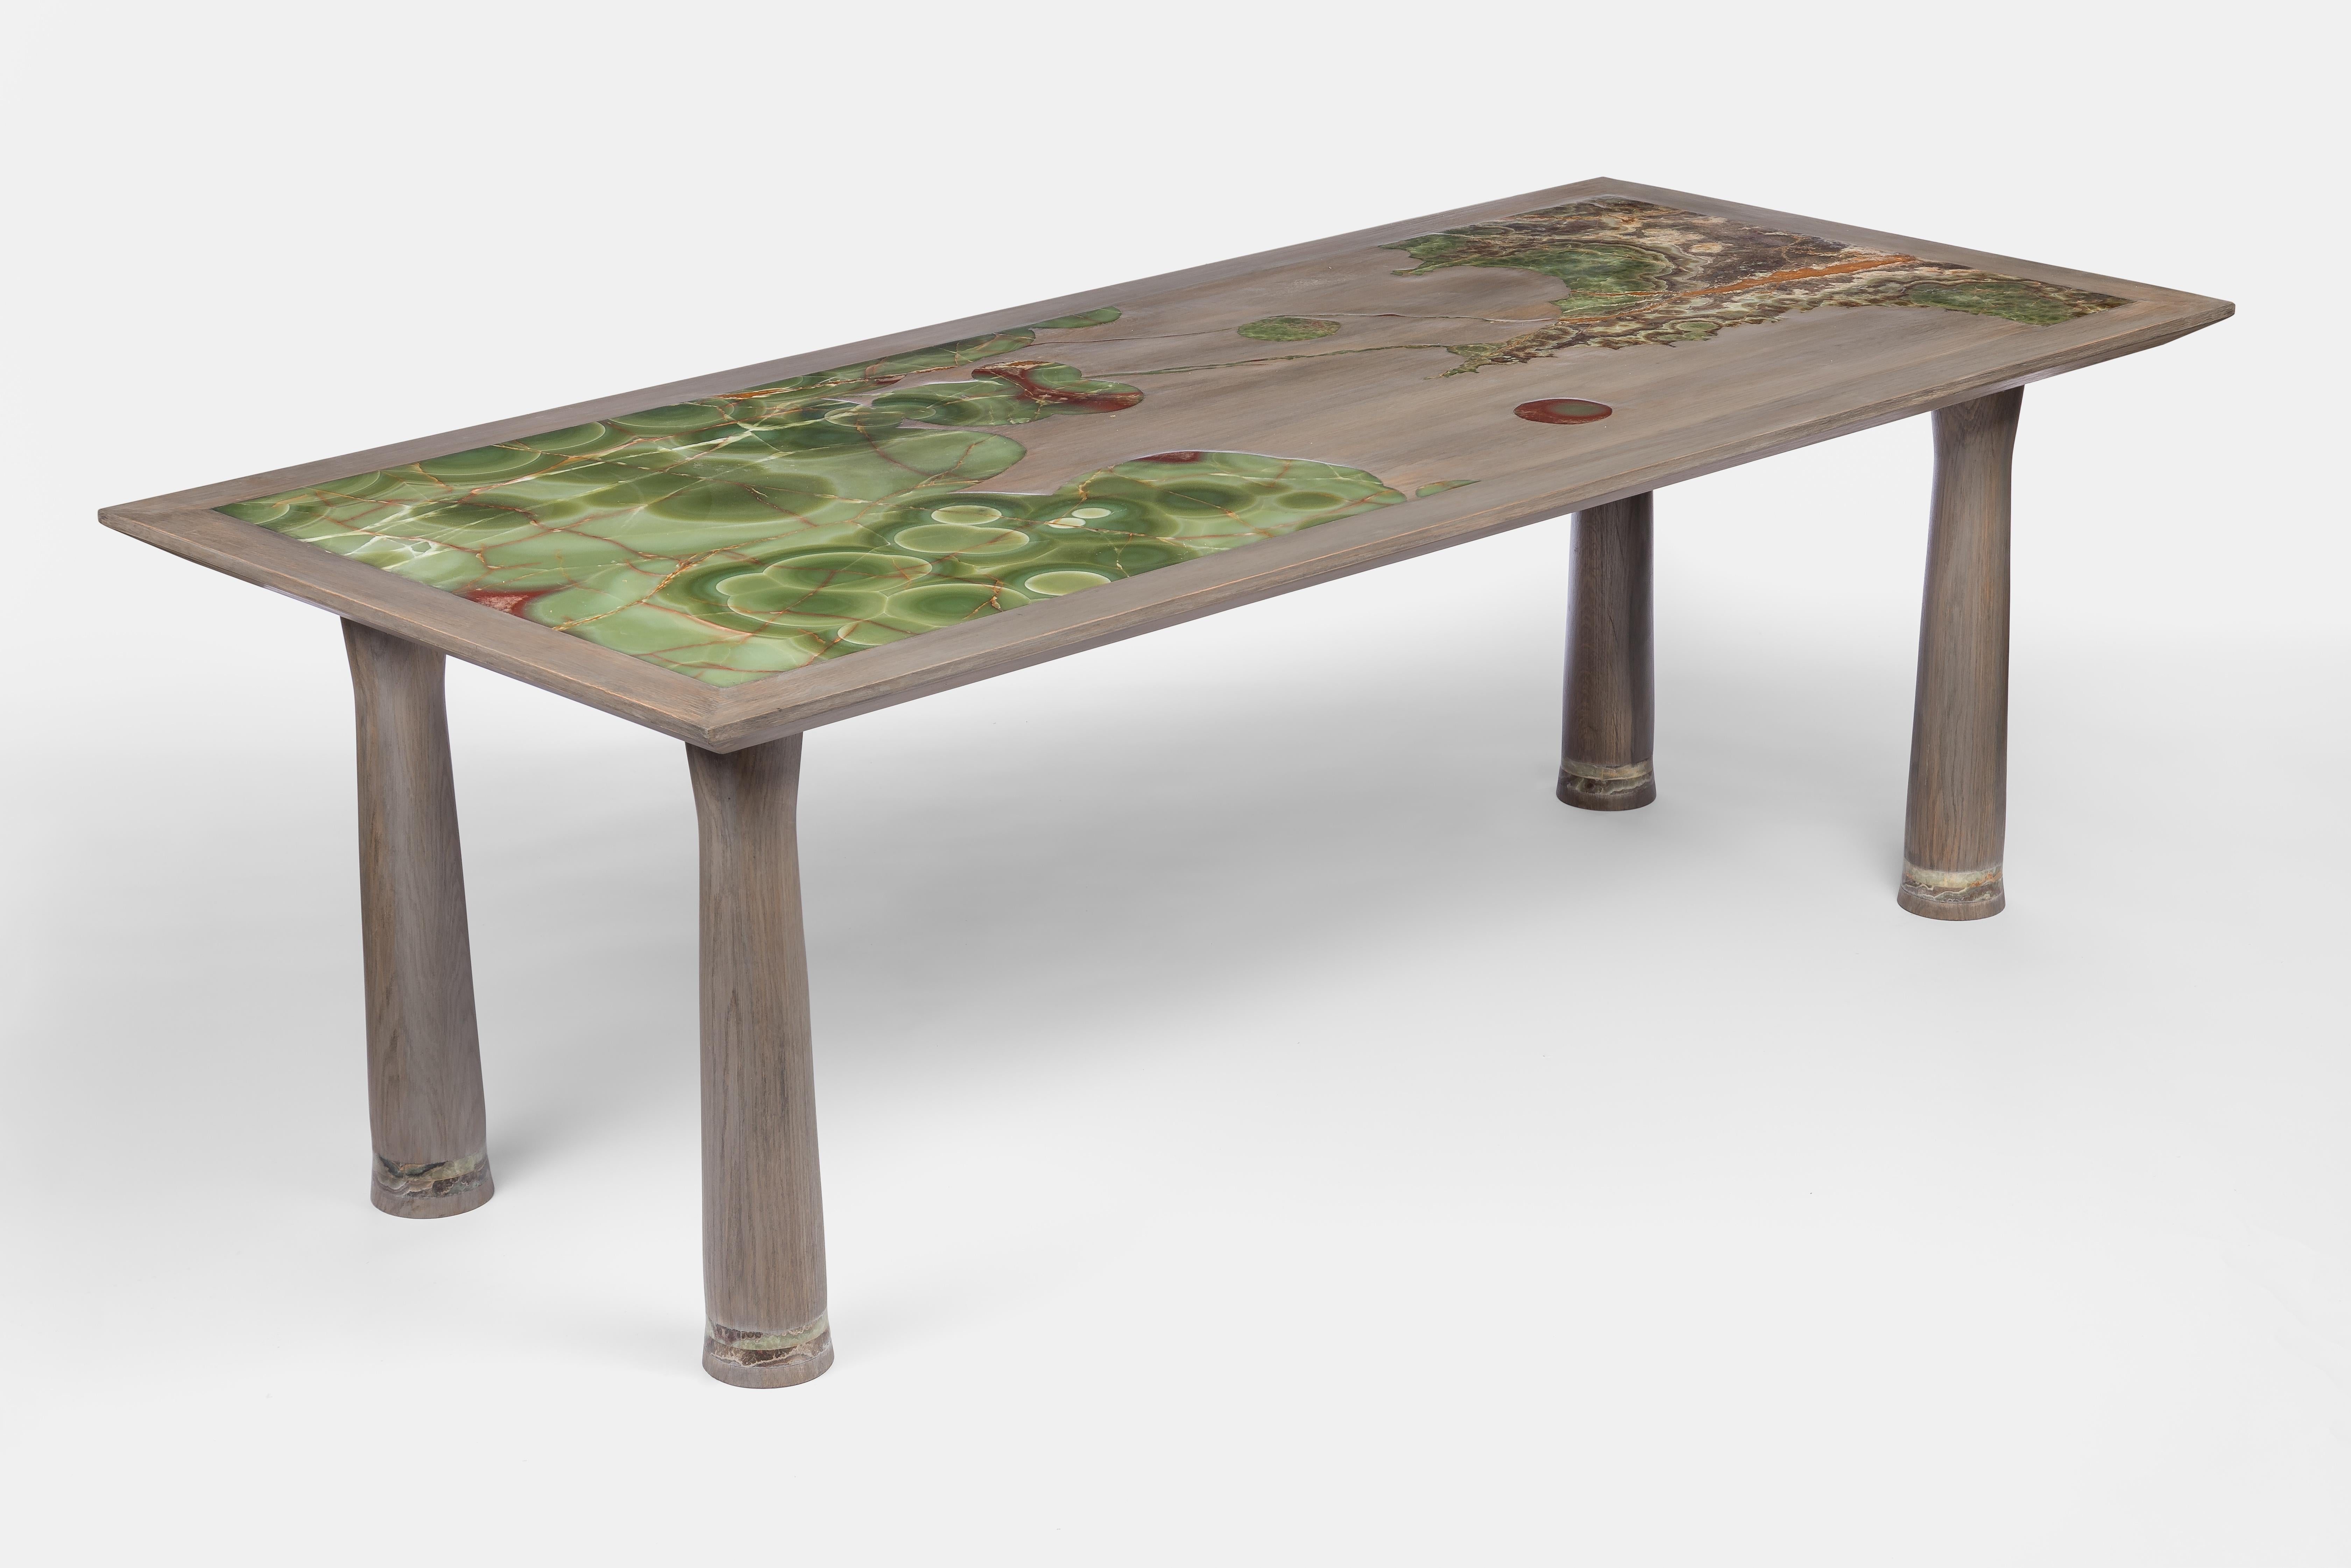 Nature dining table sculpted by Francesco Perini
Materials: Oak, onyx
Dimensions: H 75 x W 226 x D 99 cm

Following a creative path that grew out of the founding of a company, I Vassalletti, known the world over for its extraordinary creations,